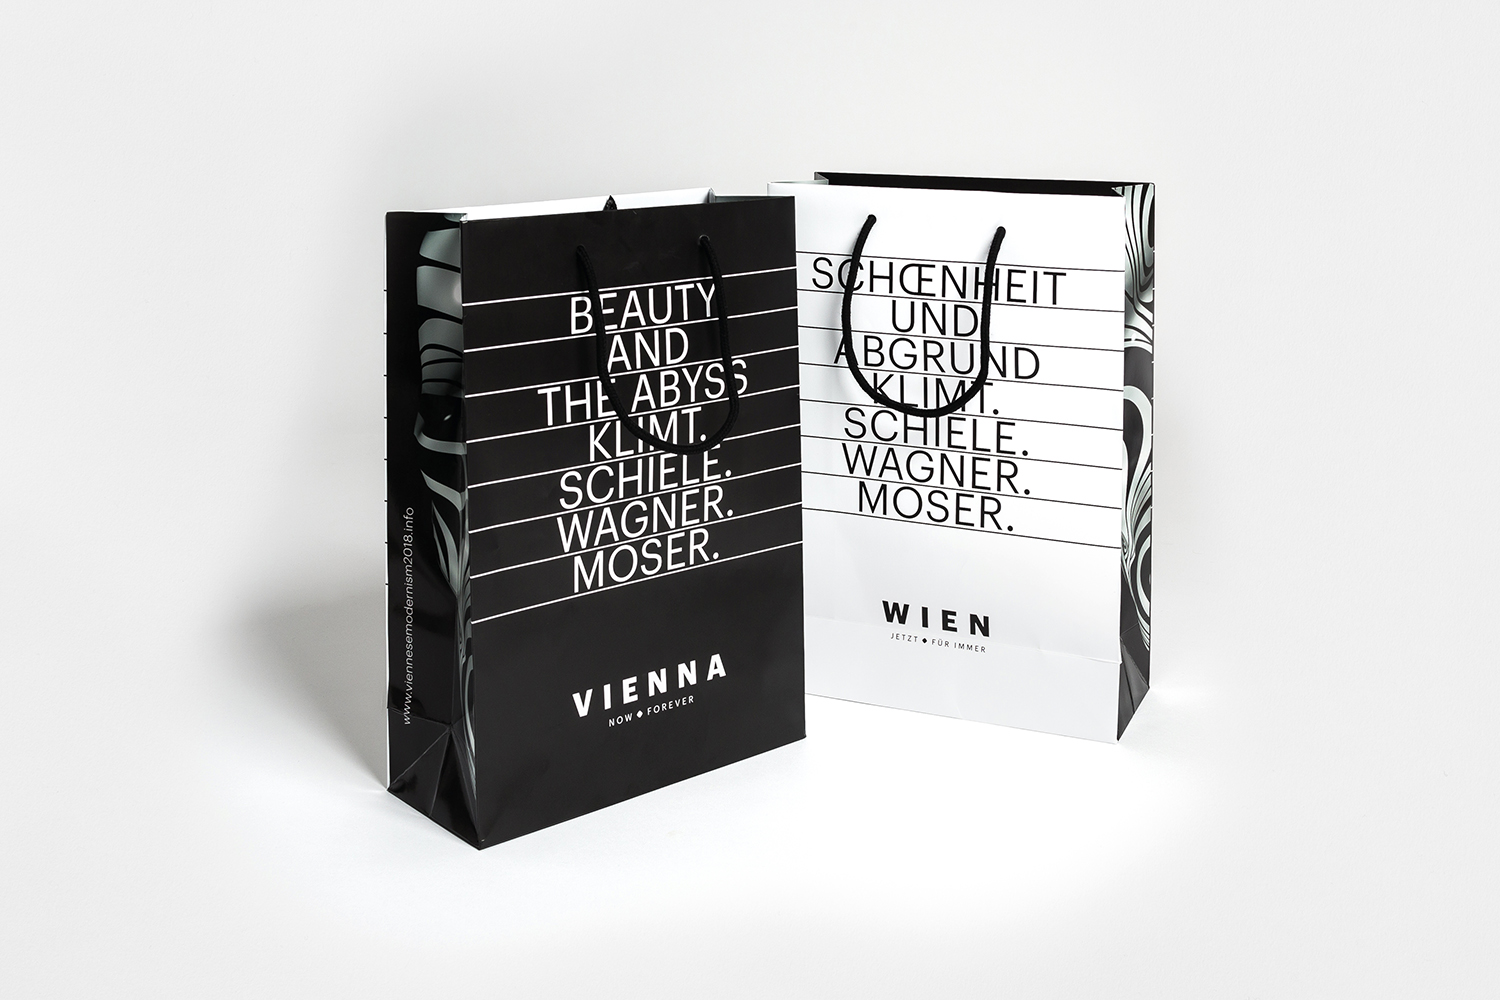 Visual identity system, posters, postcards, banners and bags by Seite Zwei for Wiener Moderne 2018